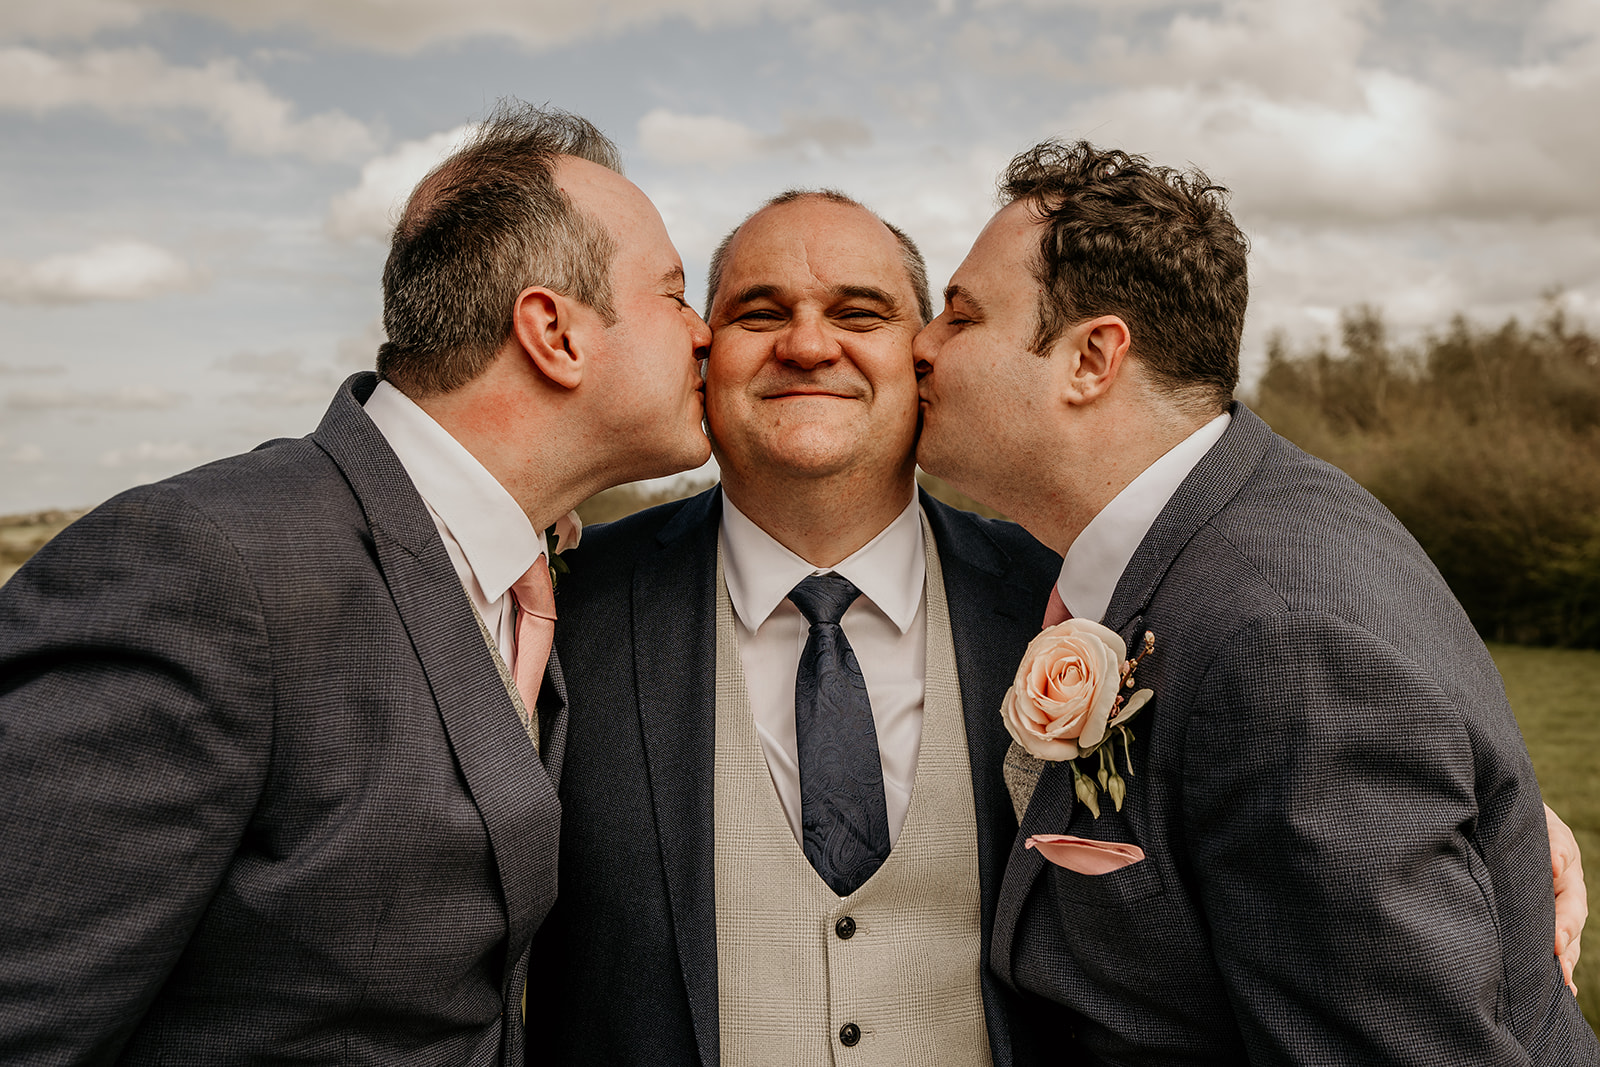 grooms kissing on wedding day